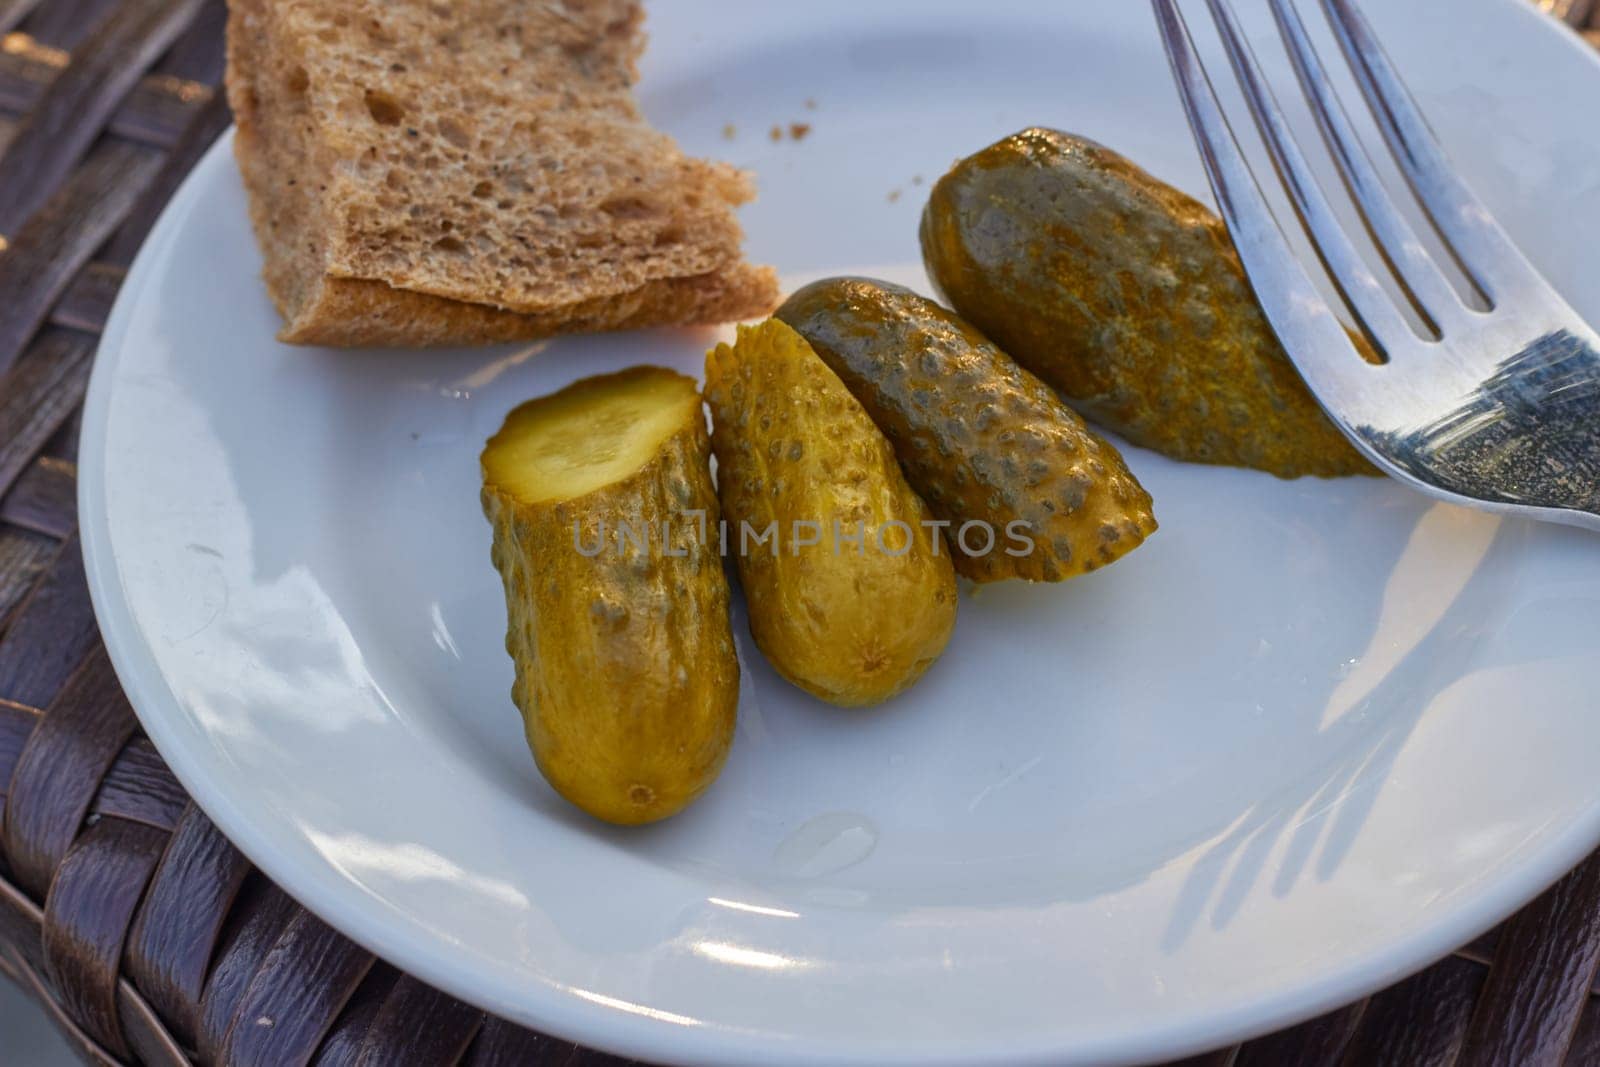 Photo pickled sliced cucumbers, a piece of rye bread on a white plate. Simple food.